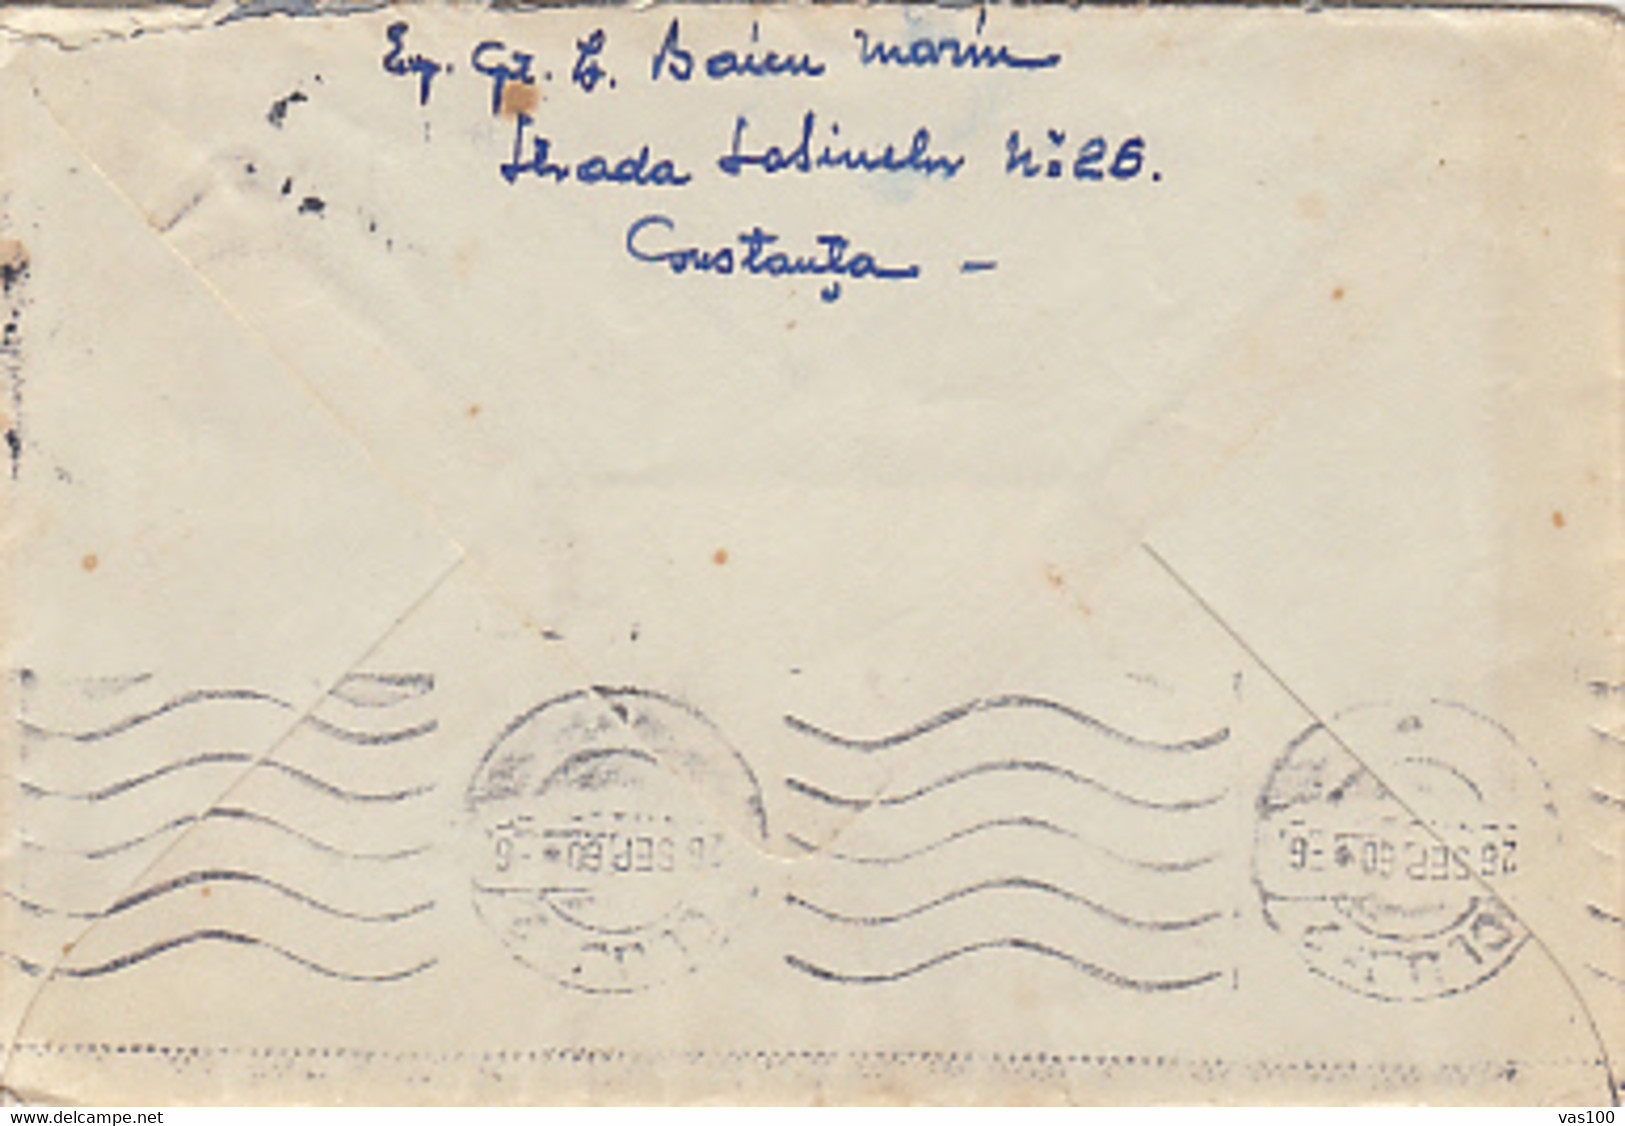 CORNFLOWER STAMP, WAVY LINES CANCELLATIONS ON COVER, 1960, ROMANIA - Covers & Documents